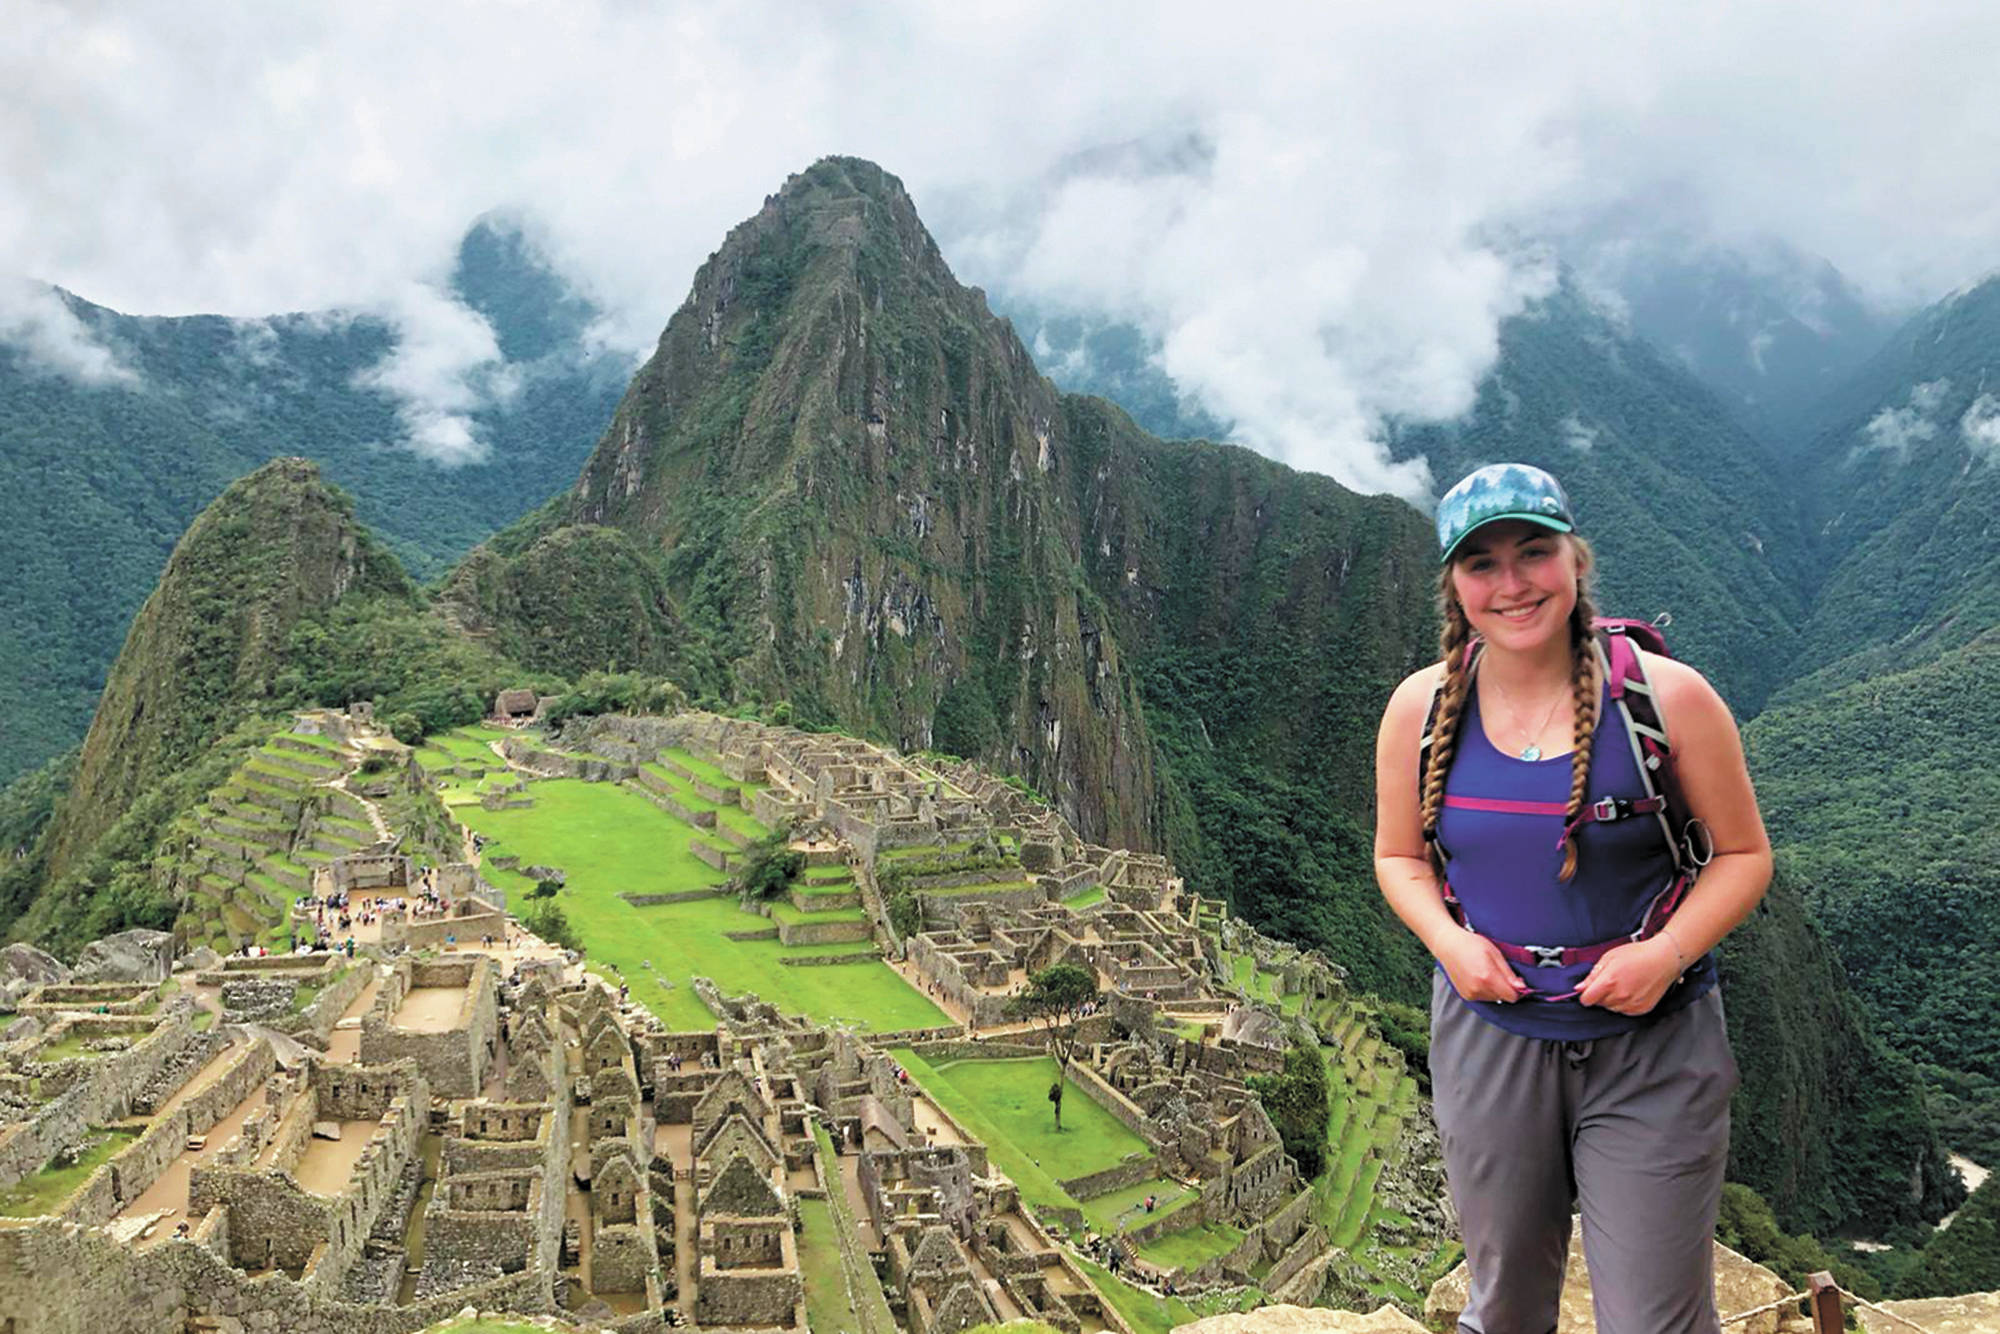 Brenna McCarron, a Homer High School graduate stuck in Peru after the country closed its borders to stem the spread of the novel coronavirus, stands at Machu Picchu, Peru. She is one of about 19 Alaskans stranded in the country. (Photo courtesy Brenna McCarron)